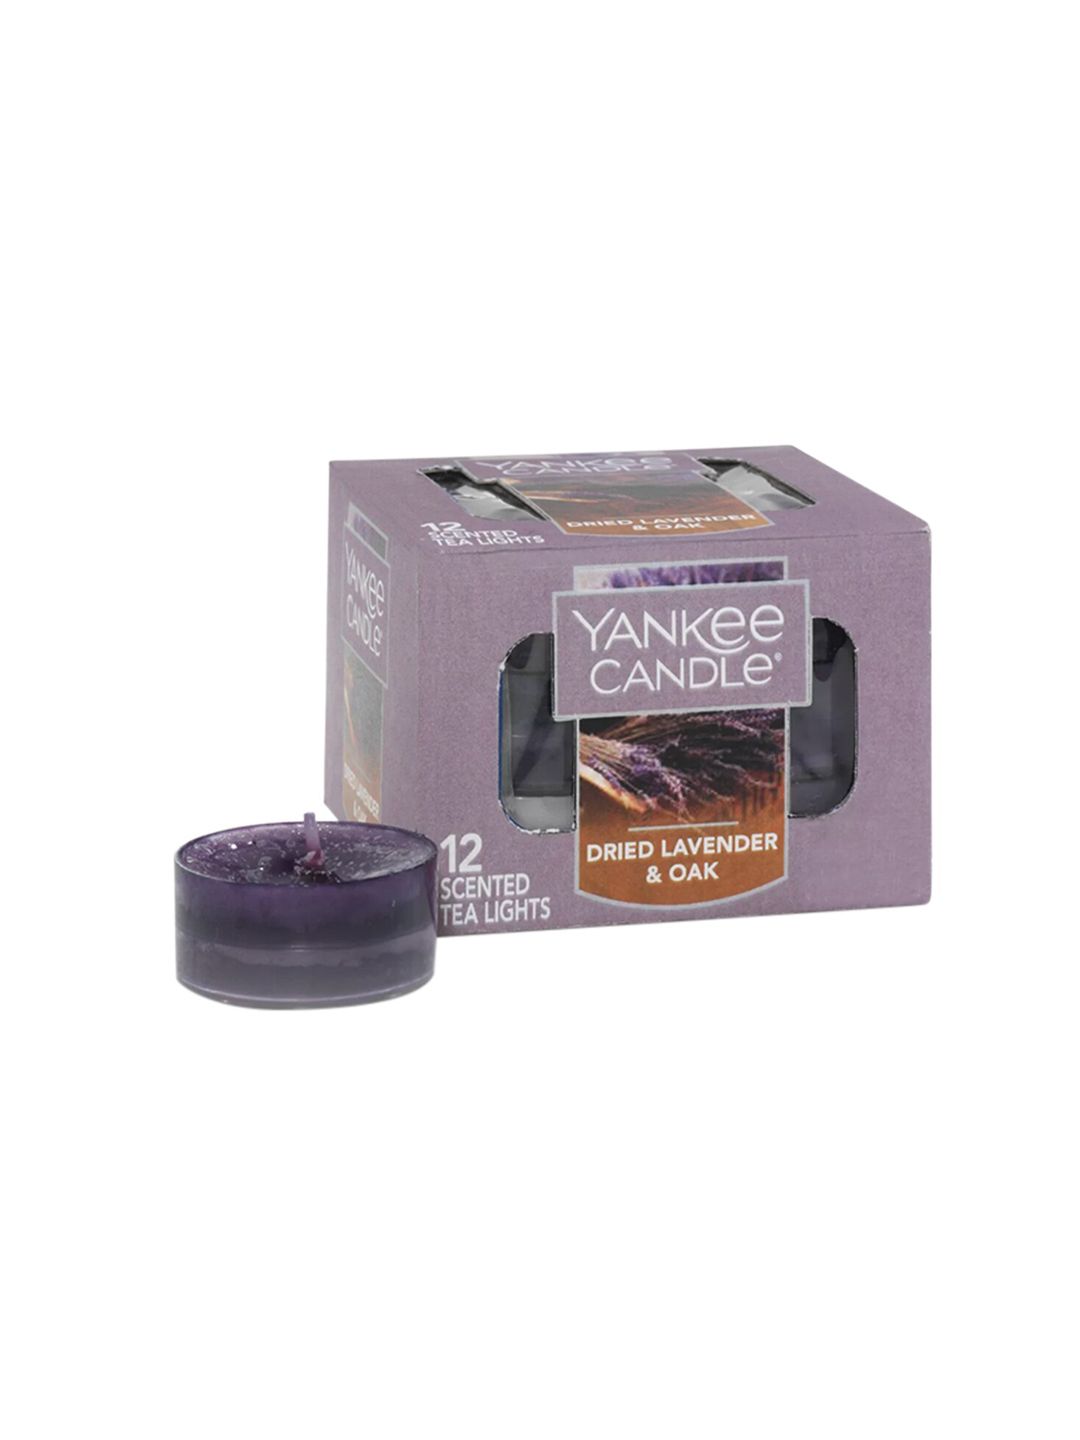 YANKEE CANDLE Set Of 12 Lavender & Oak Original Tealights Dried Candles Price in India